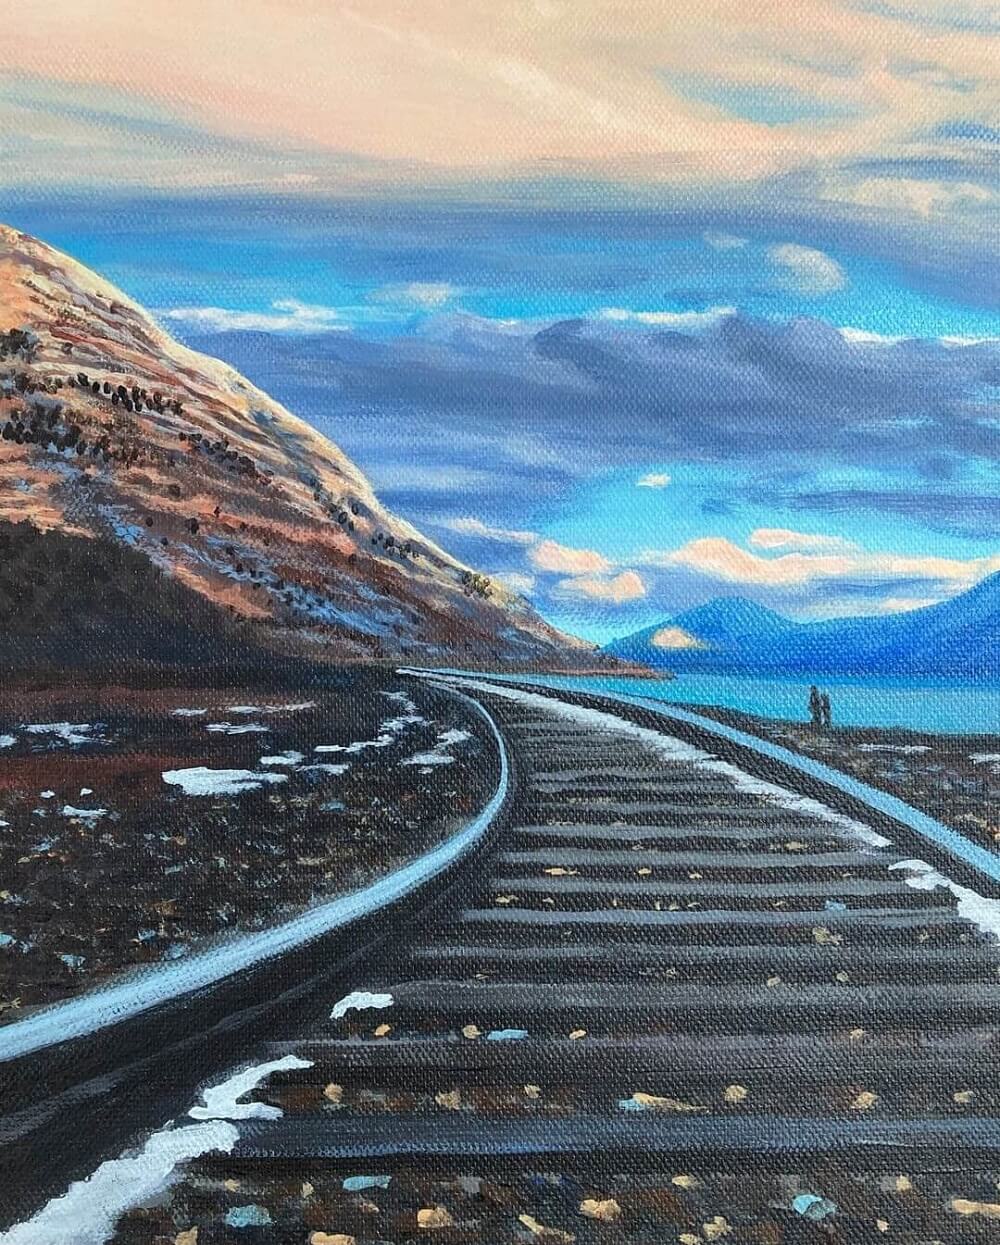 Painting of a windy railway track near the mountains.